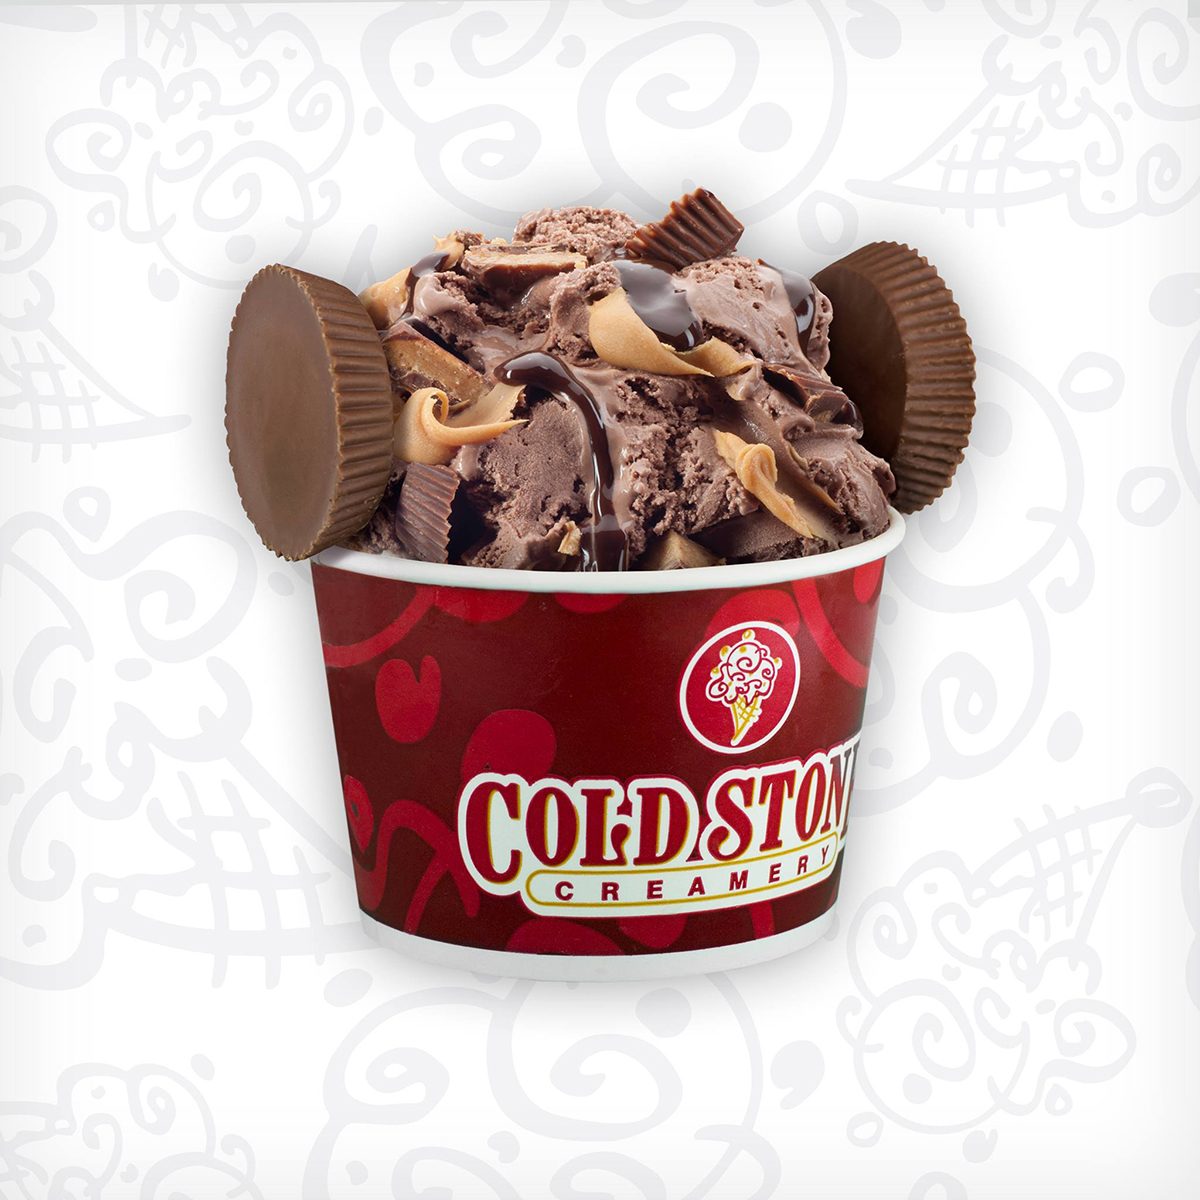 <p><strong><a class="SWhtmlLink" href="https://www.coldstonecreamery.com" rel="noopener">Cold Stone Creamery</a>, Tempe</strong></p> <p>The founders of Cold Stone Creamery weren't satisfied with the ice cream they could buy, so they decided to make a better brand. Their secret? Making the ice cream in-house every day and mixing it on a granite slab that's chilled to 16 degrees.</p>